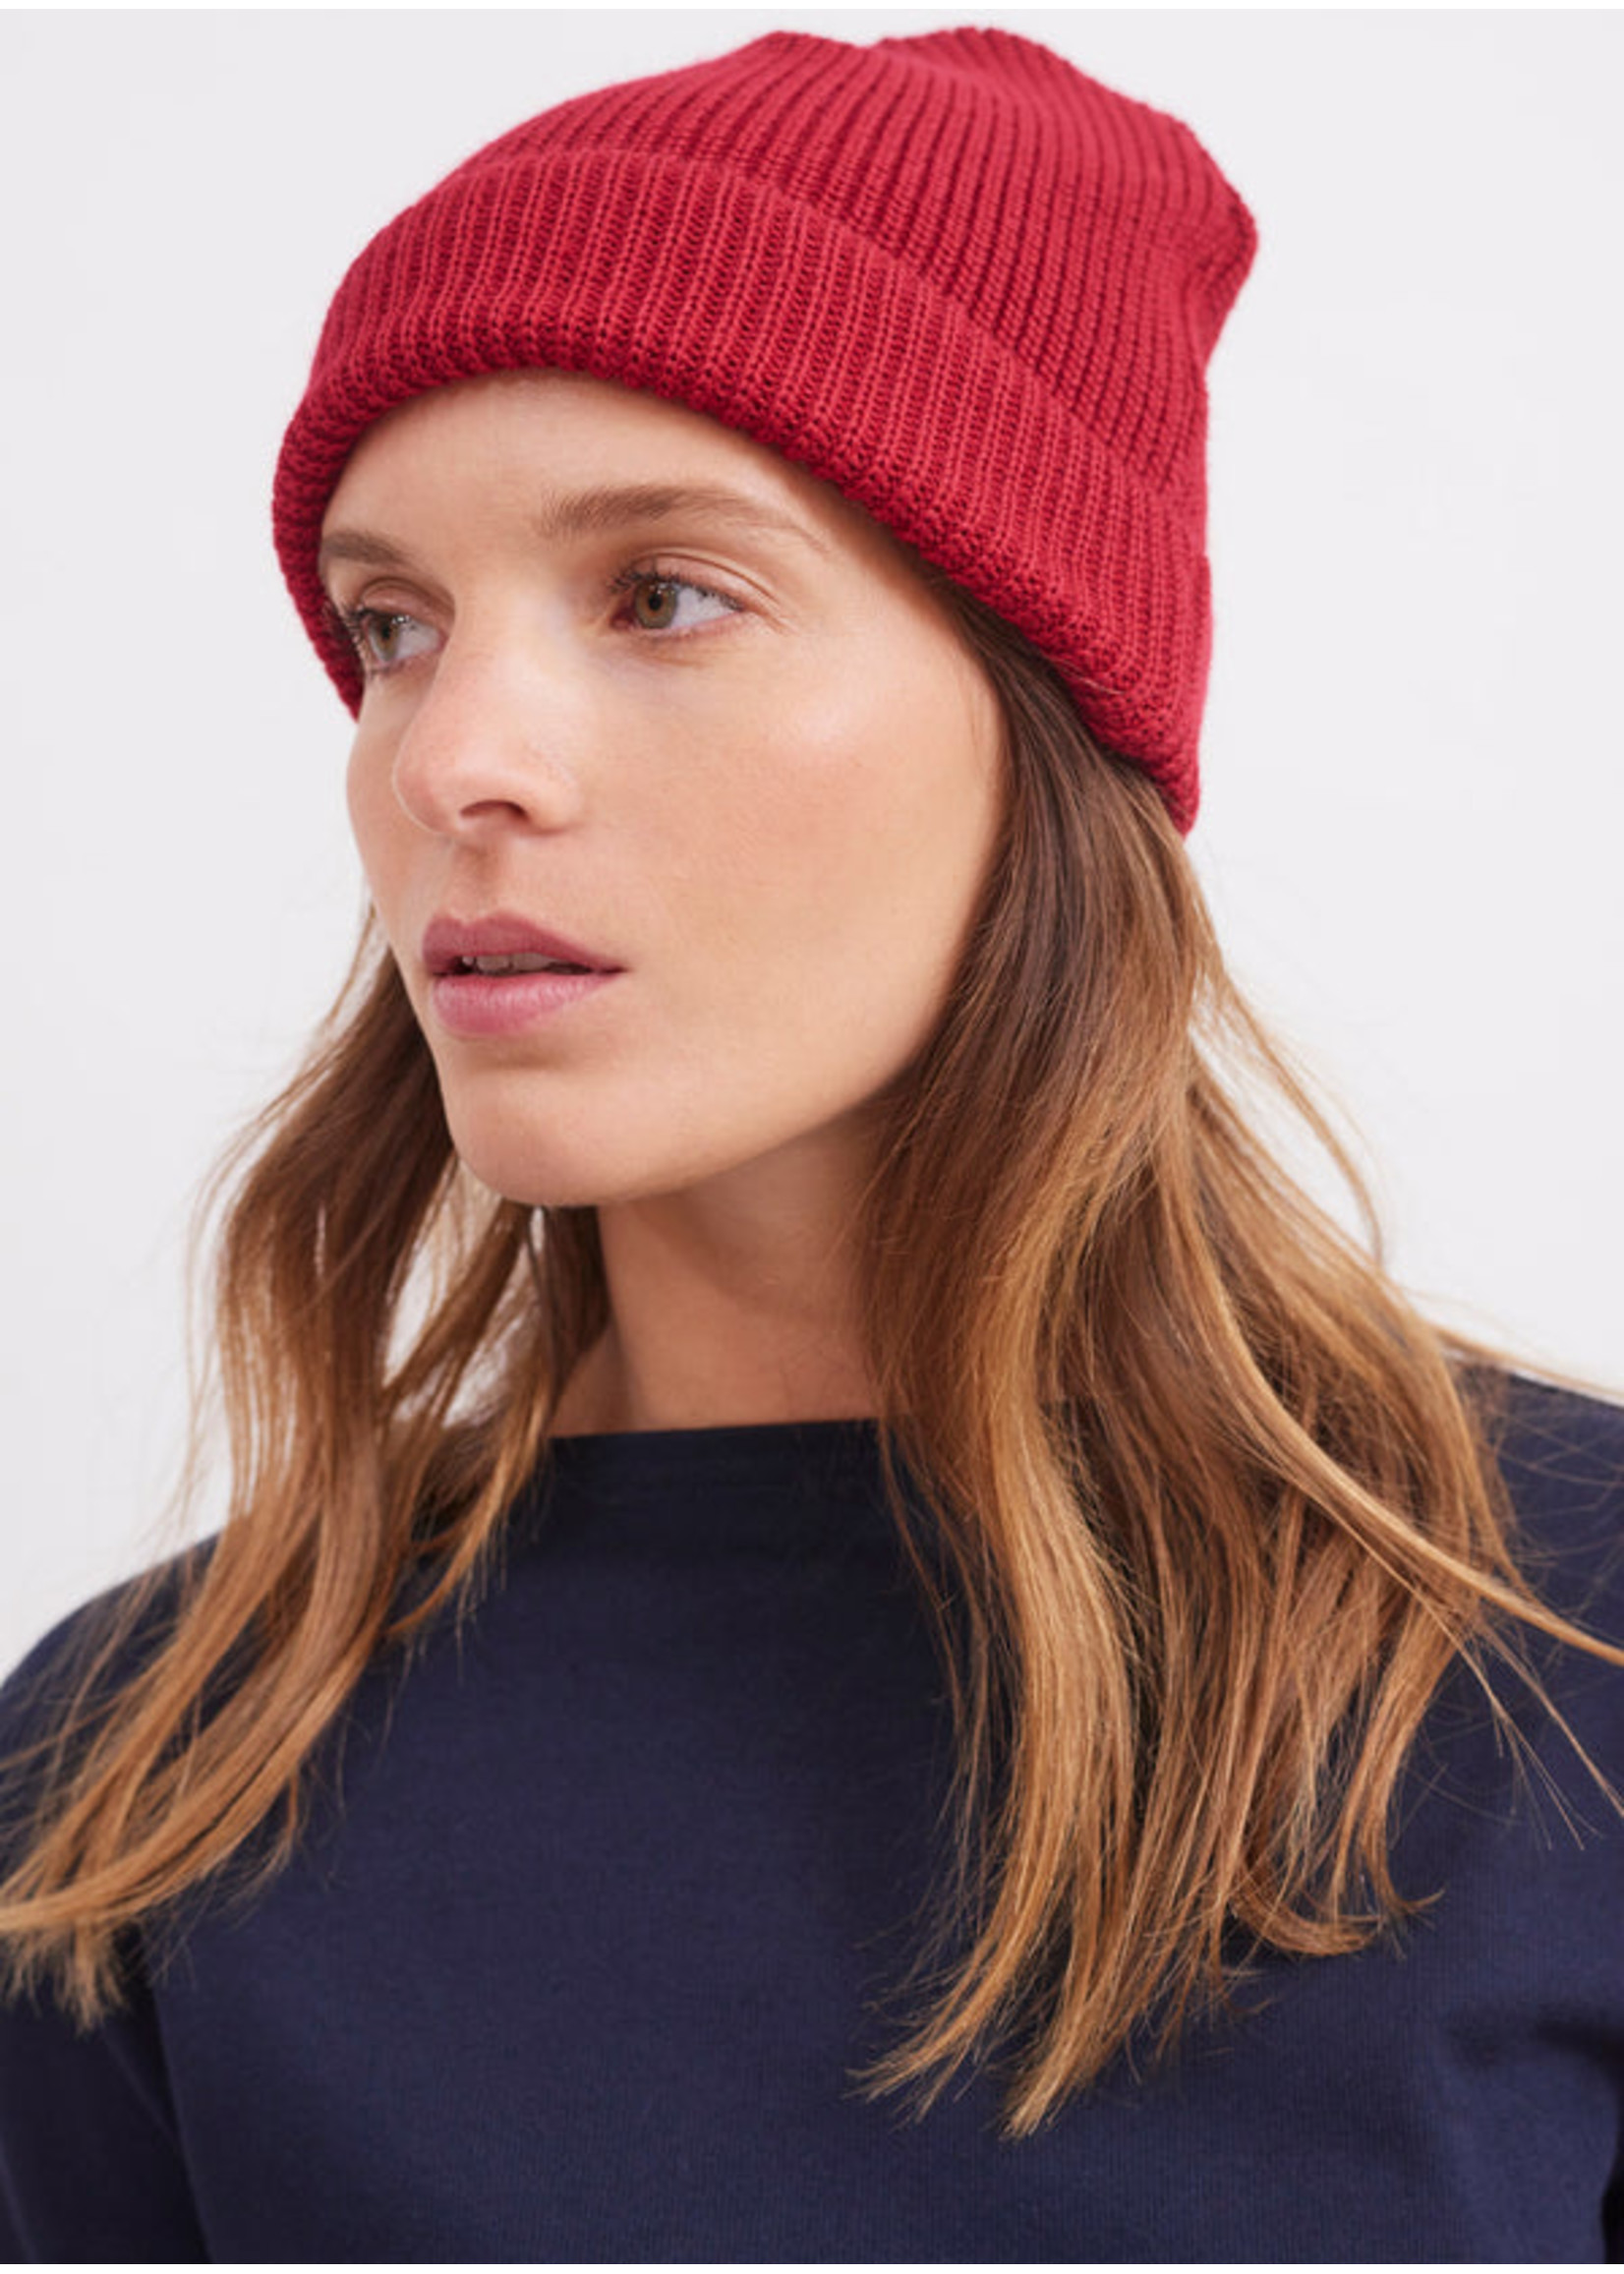 Unisex knitted beanie - wool espace boutique Lacroix